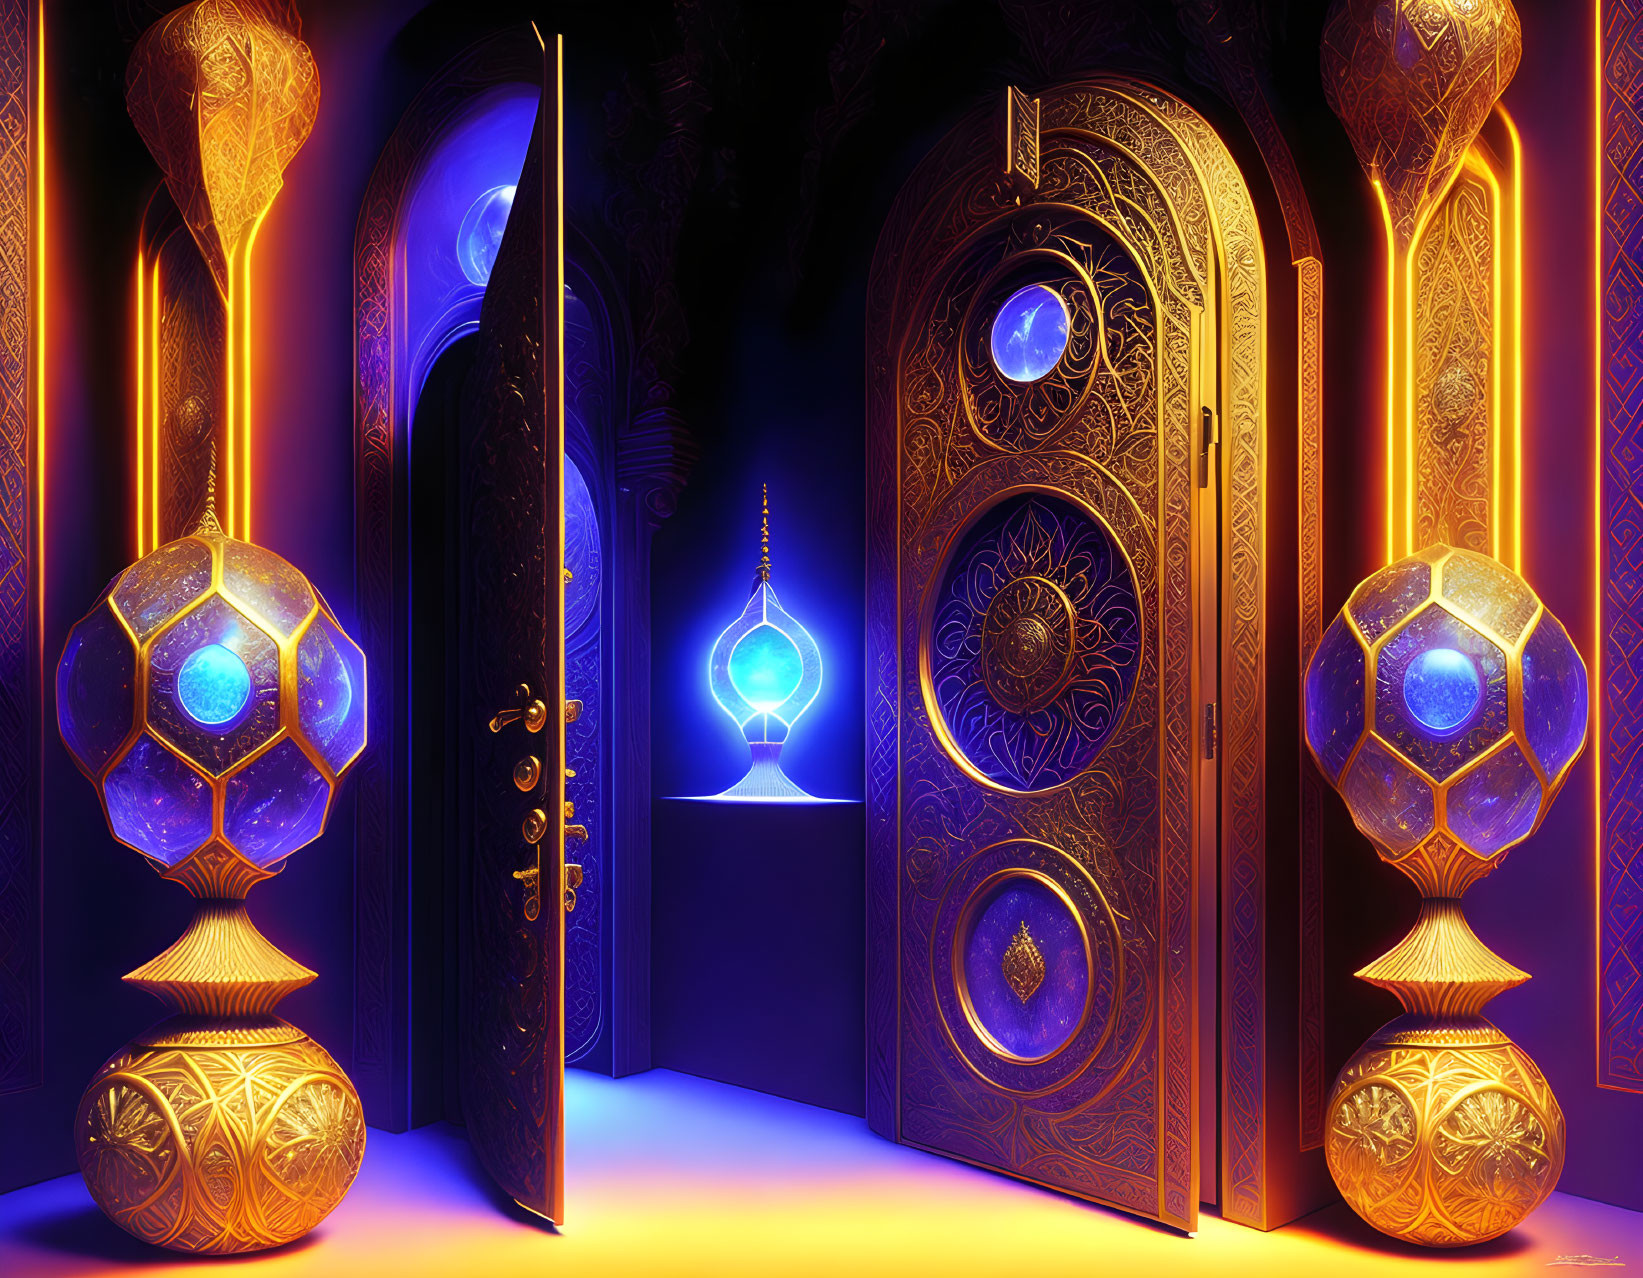 Vibrant fantasy scene with ornate golden doors and glowing blue crystals